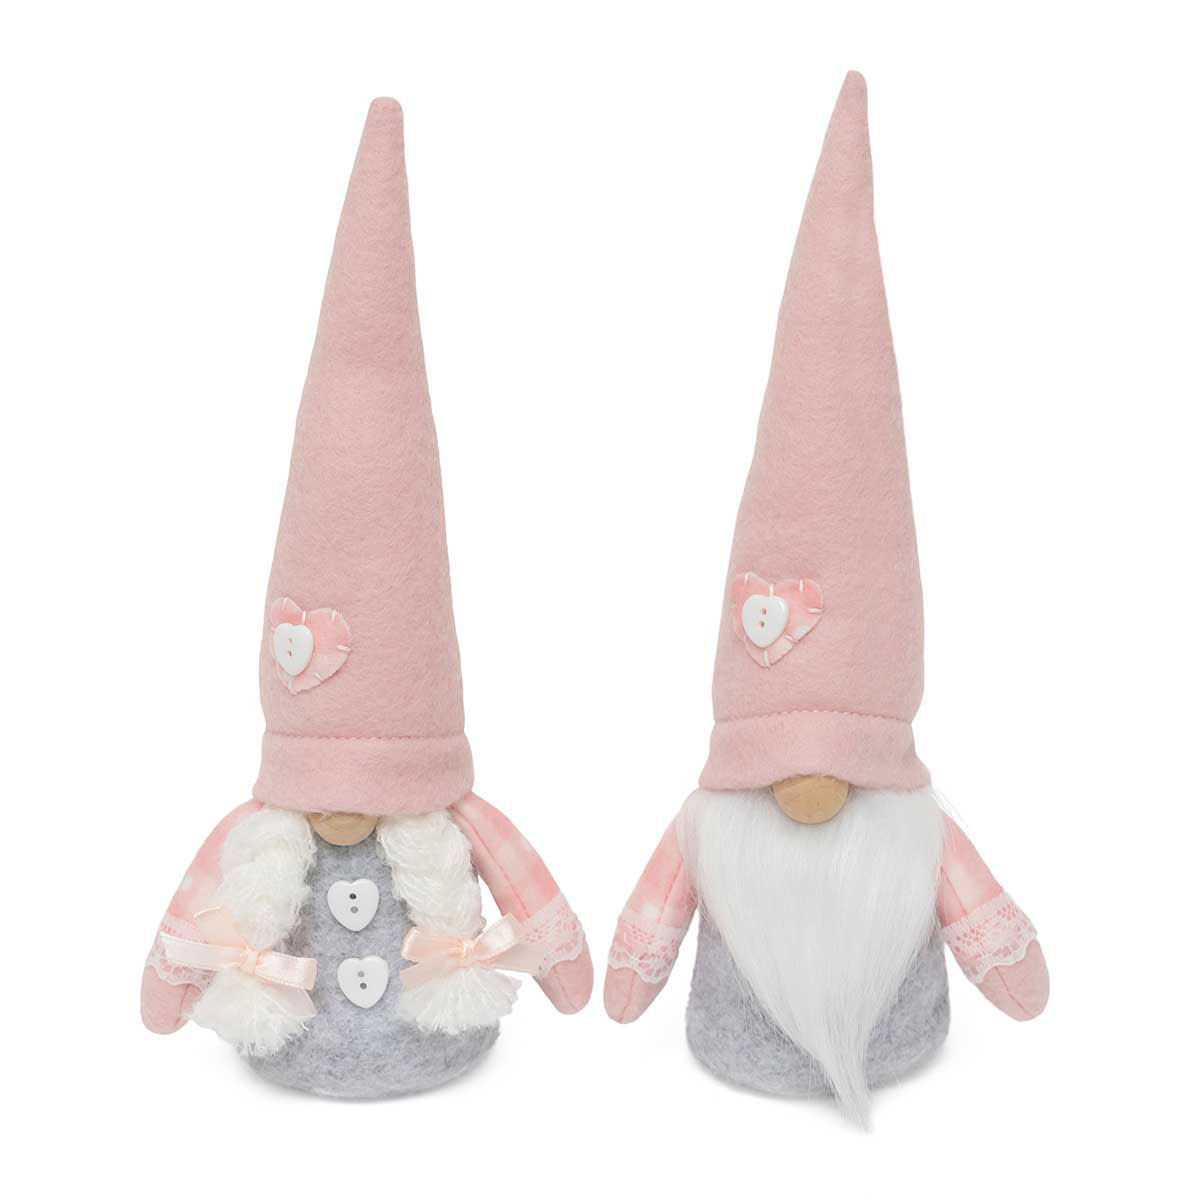 b50 Sweetheart Gnome Couple with Wood Nose 9.5"